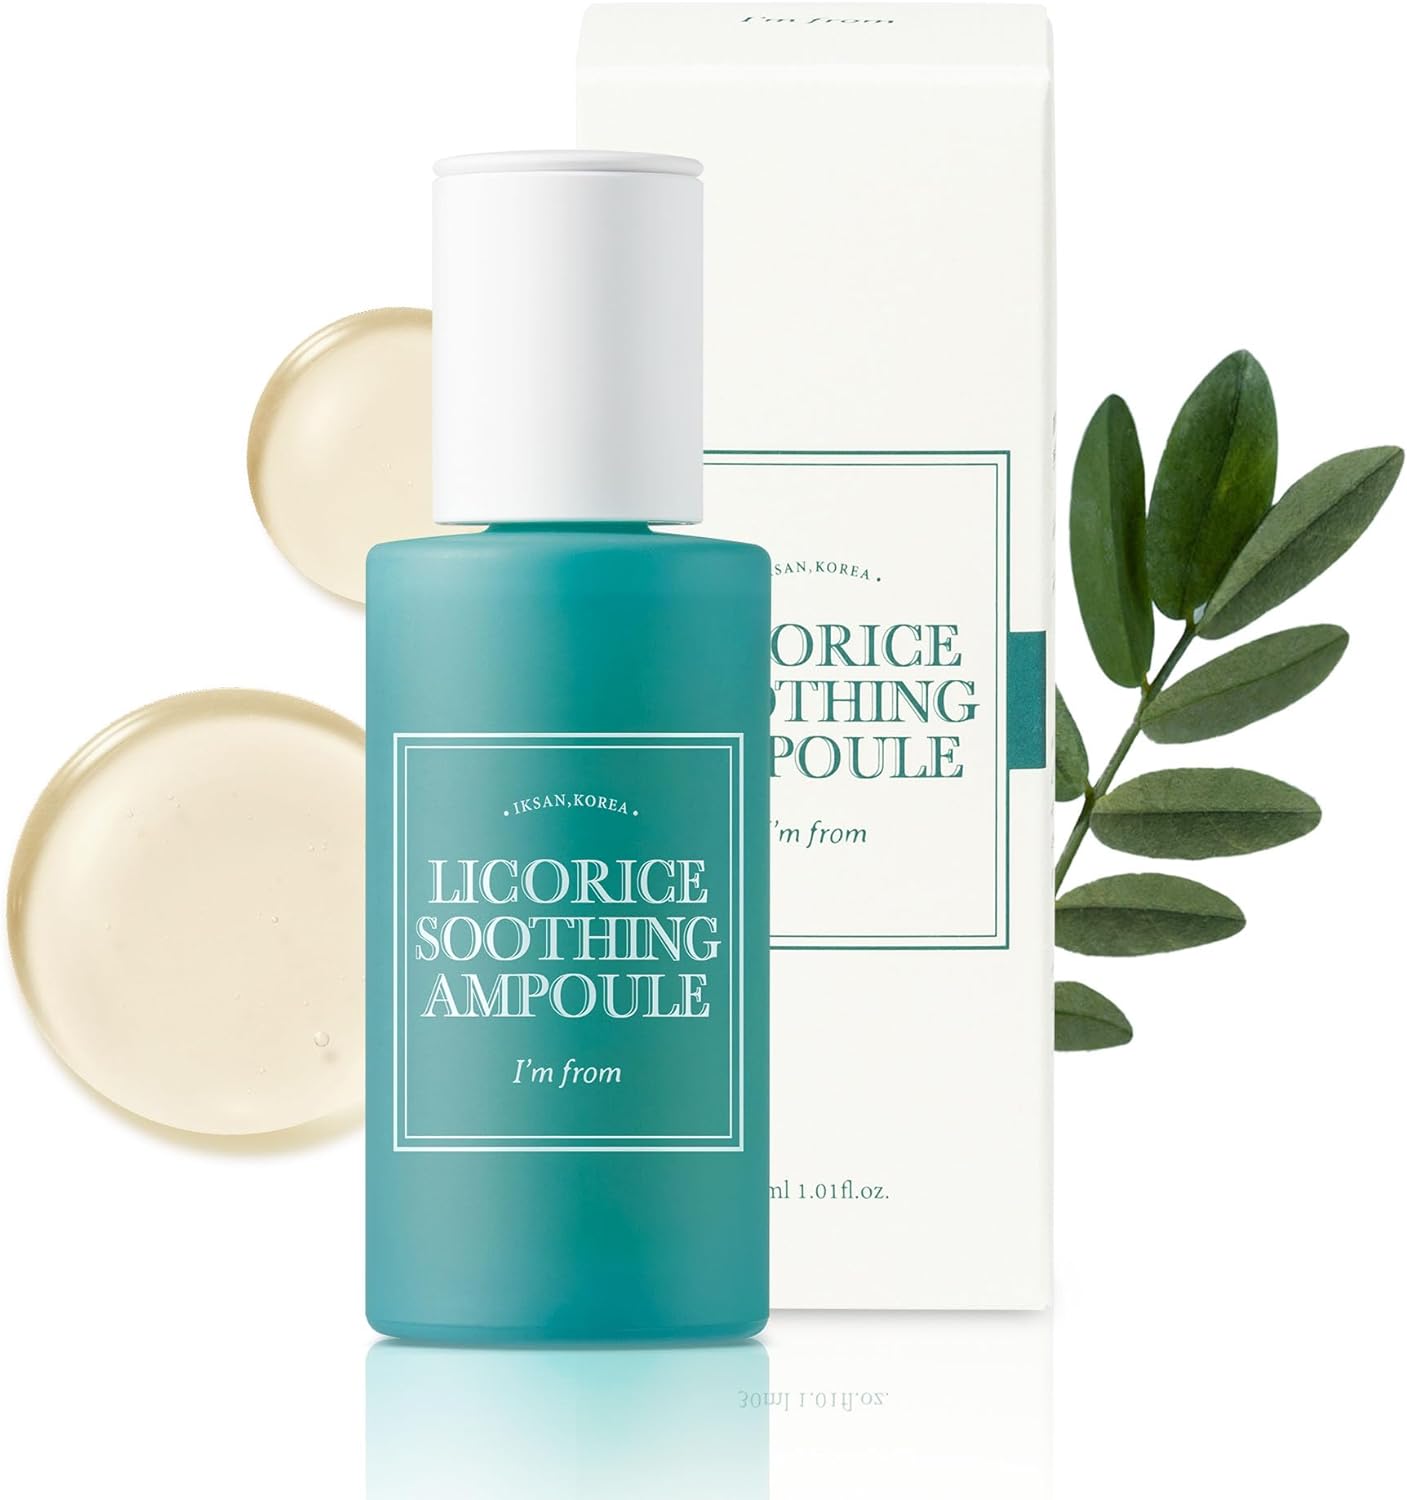 I'm from Licorice Soothing Ampoule 30ml